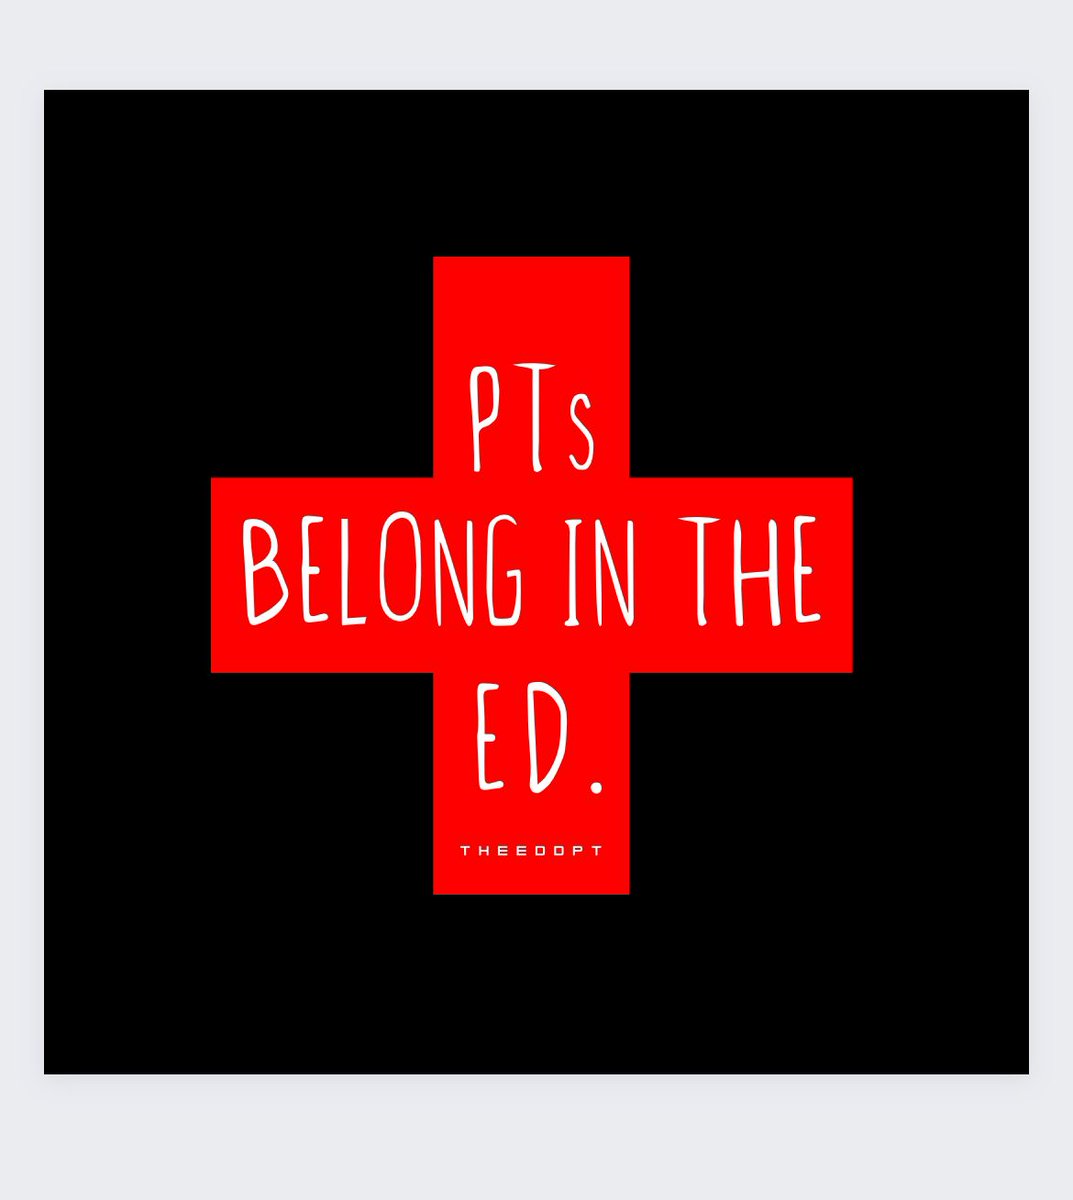 Just a reminder.

#EDPT #PTintheED #Physicaltherapist #emergencydepartment #Topofscope